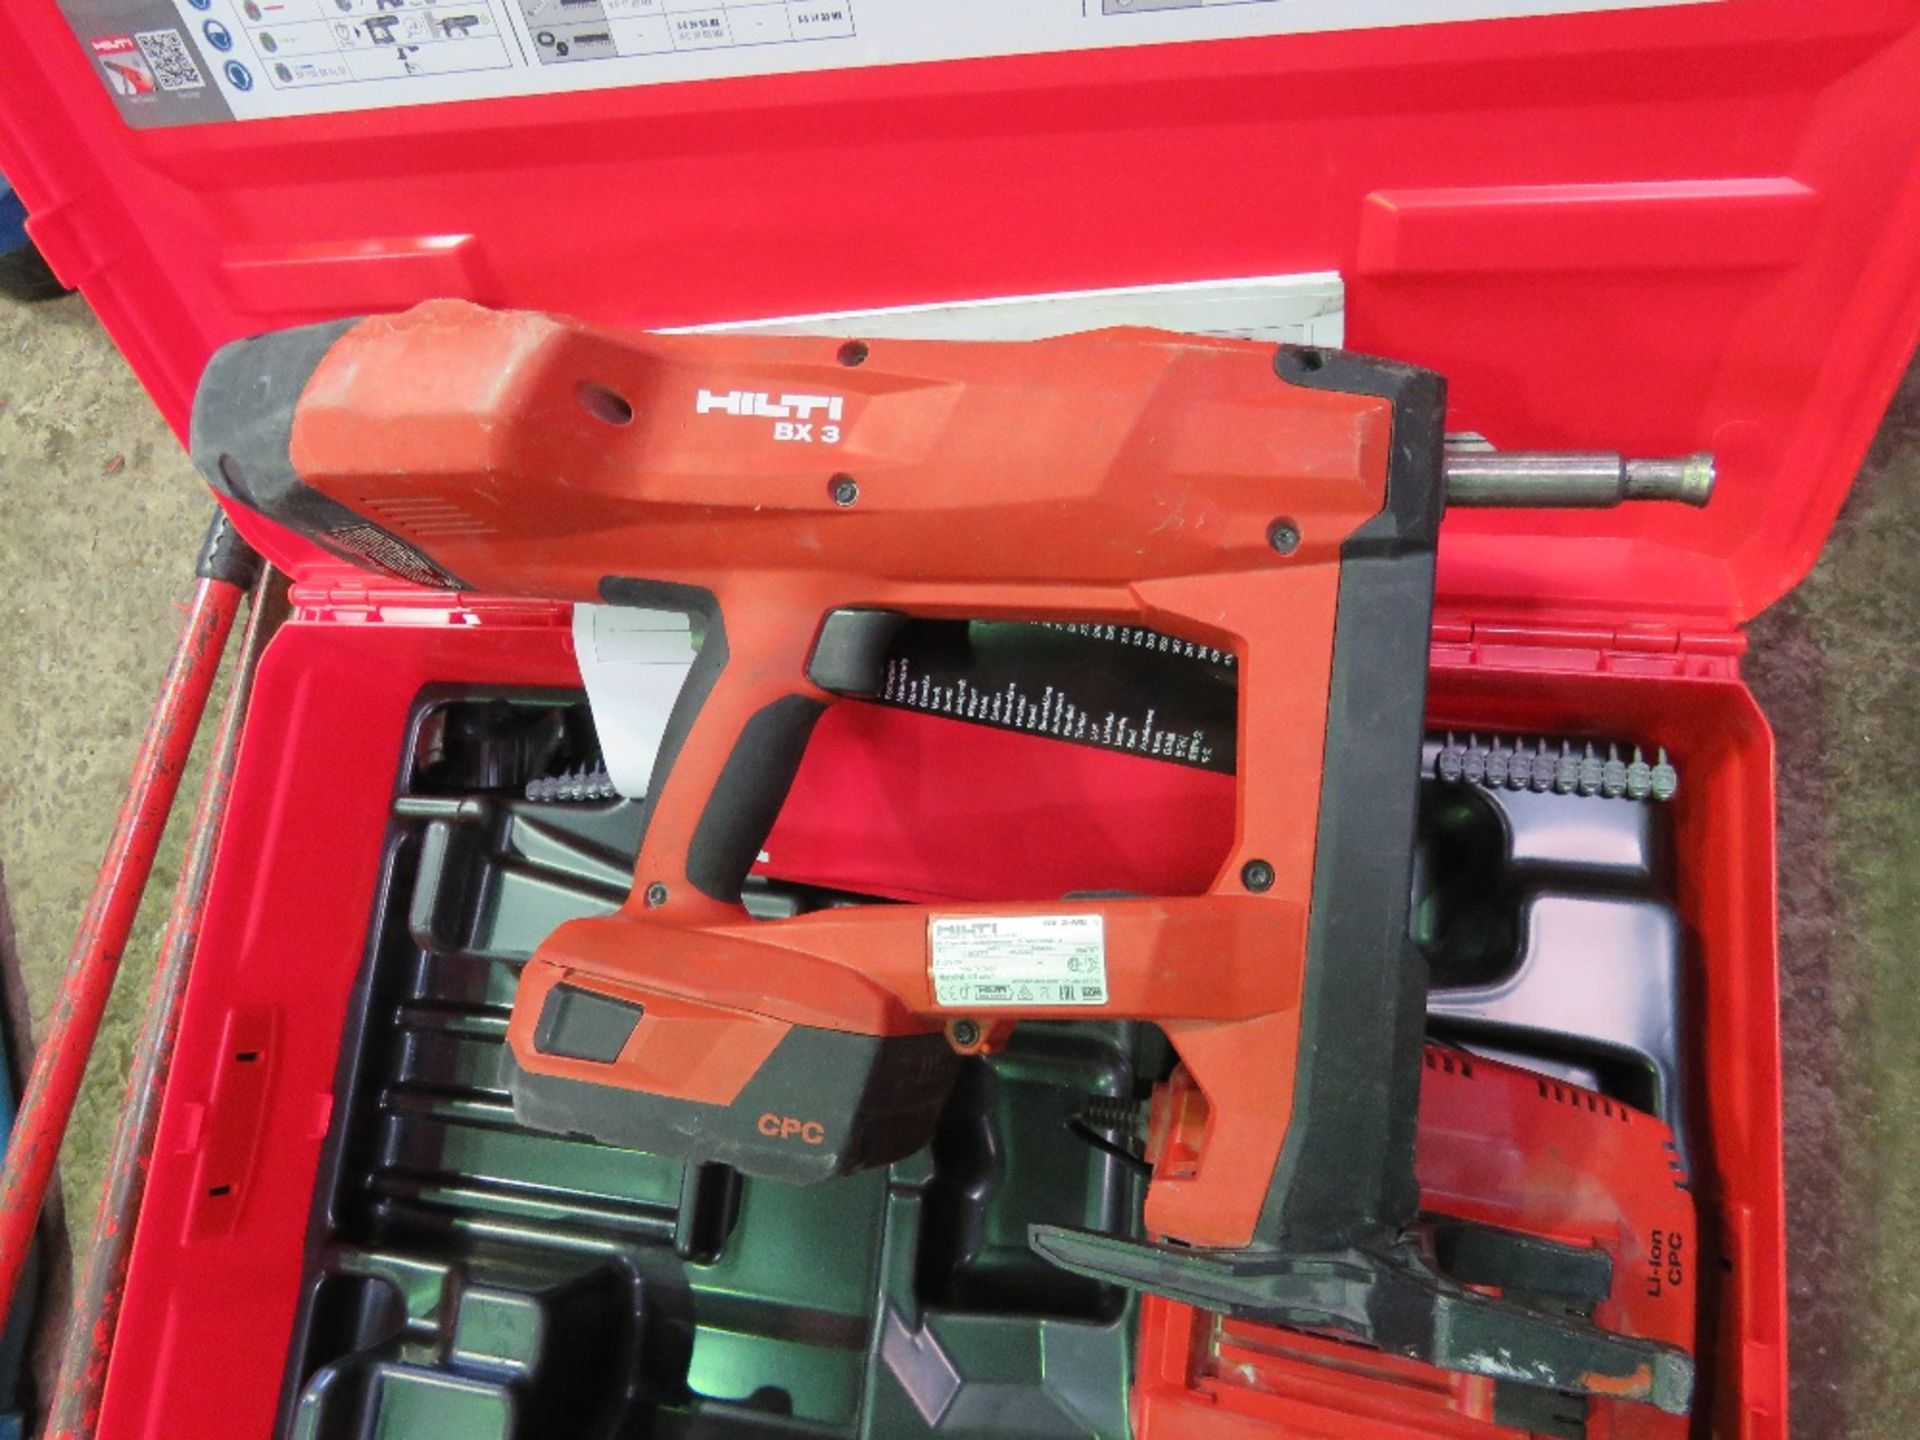 2 X HILTI BX3-ME NAIL GUNS, MAY BE INCOMPLETE? SOURCED FROM LOCAL BUILDING COMPANY LIQUIDATION. - Image 5 of 5